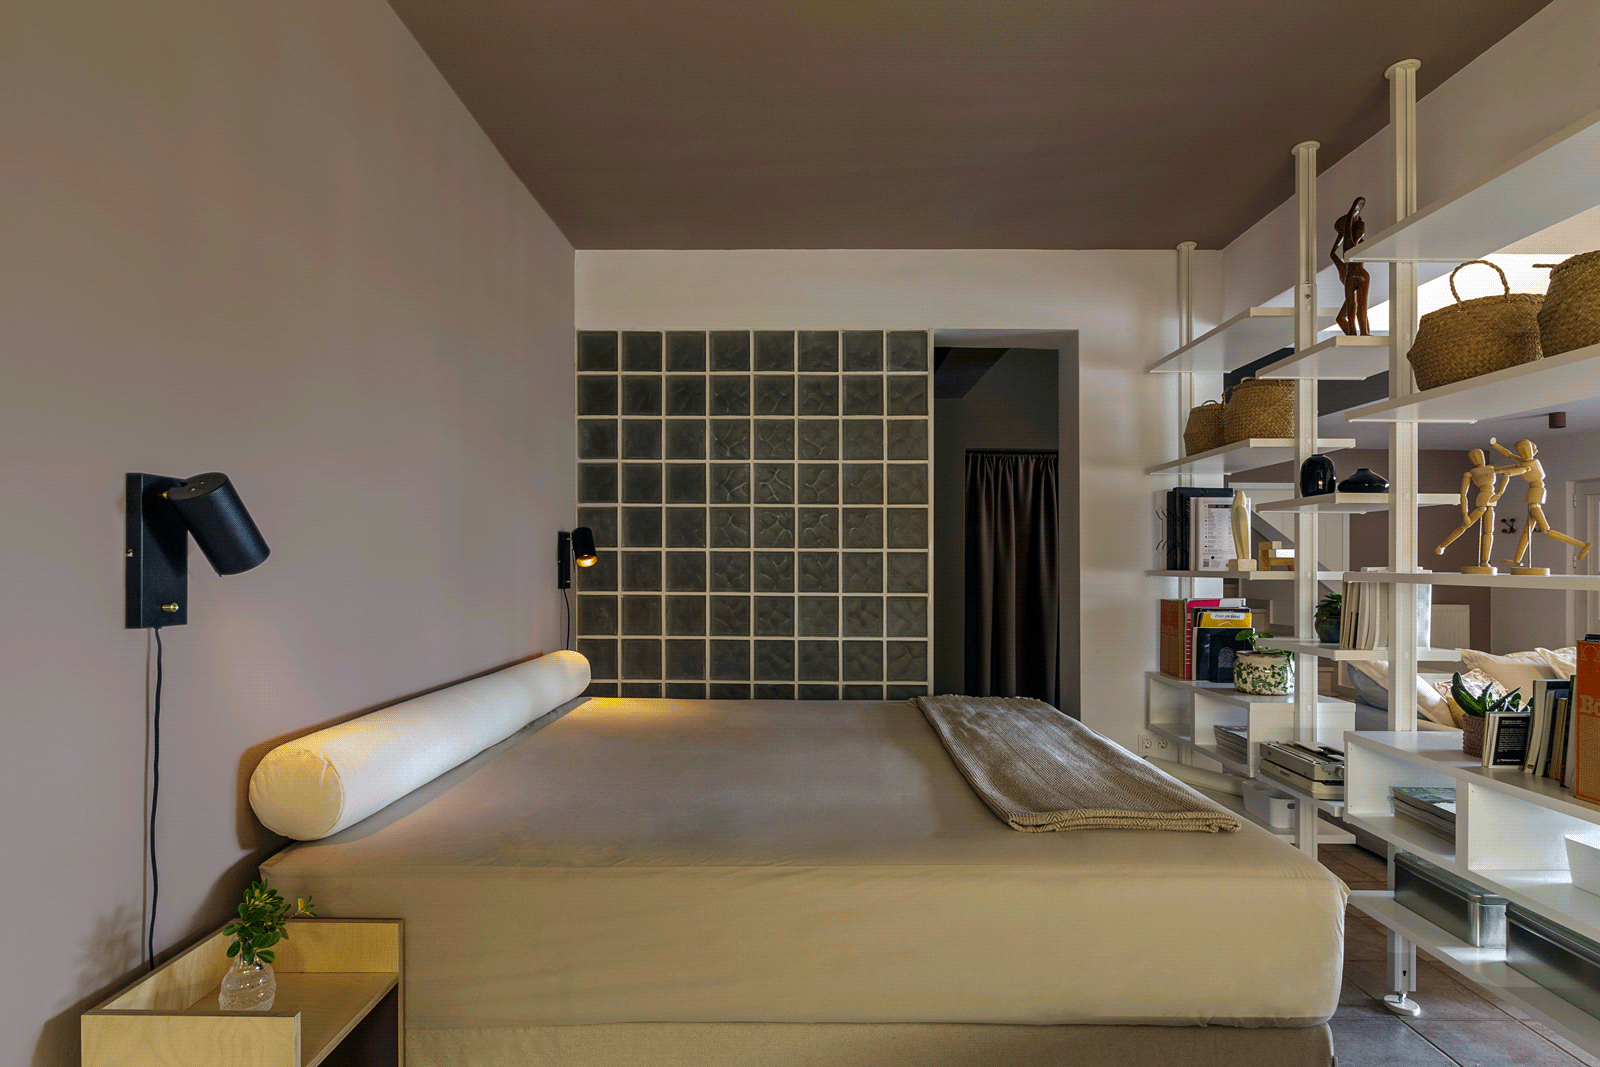 Archisearch Artemis Project - Renovation of a former storage space into a studio apartment by AR03412 STUDIO